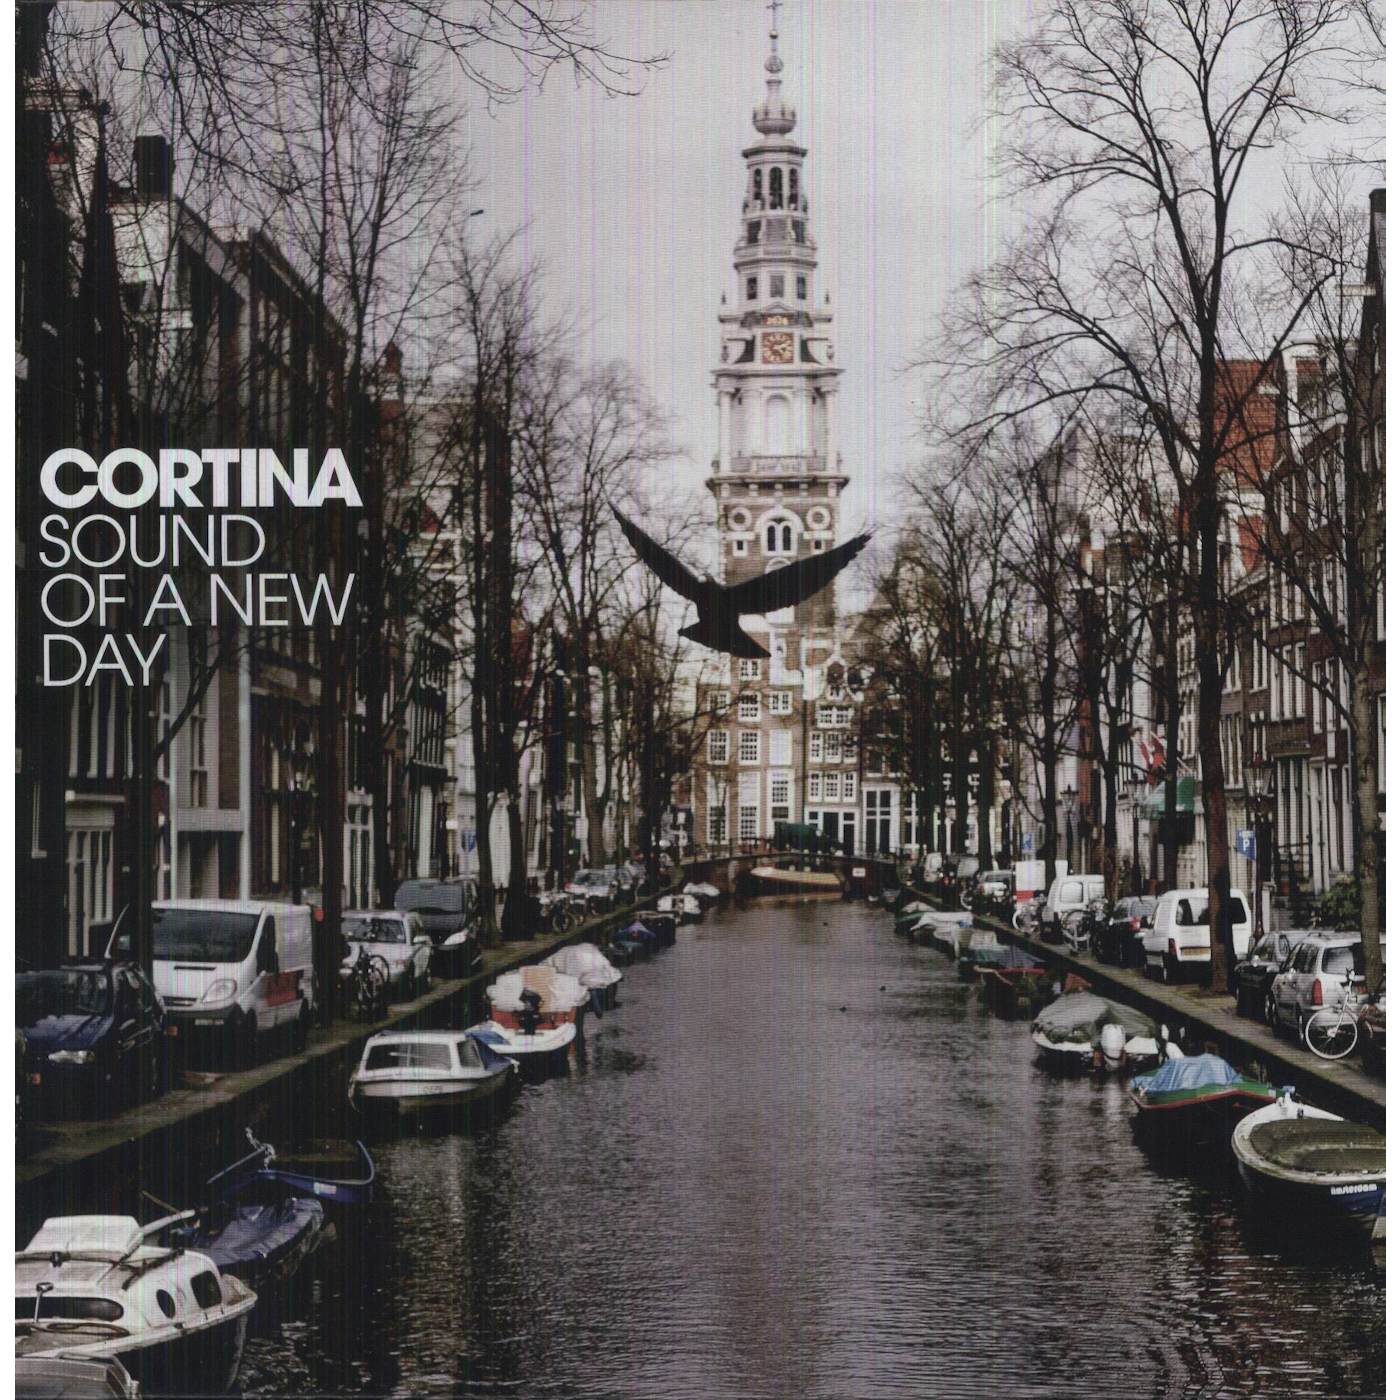 Cortina SOUND OF A NEW DAY Vinyl Record - Sweden Release